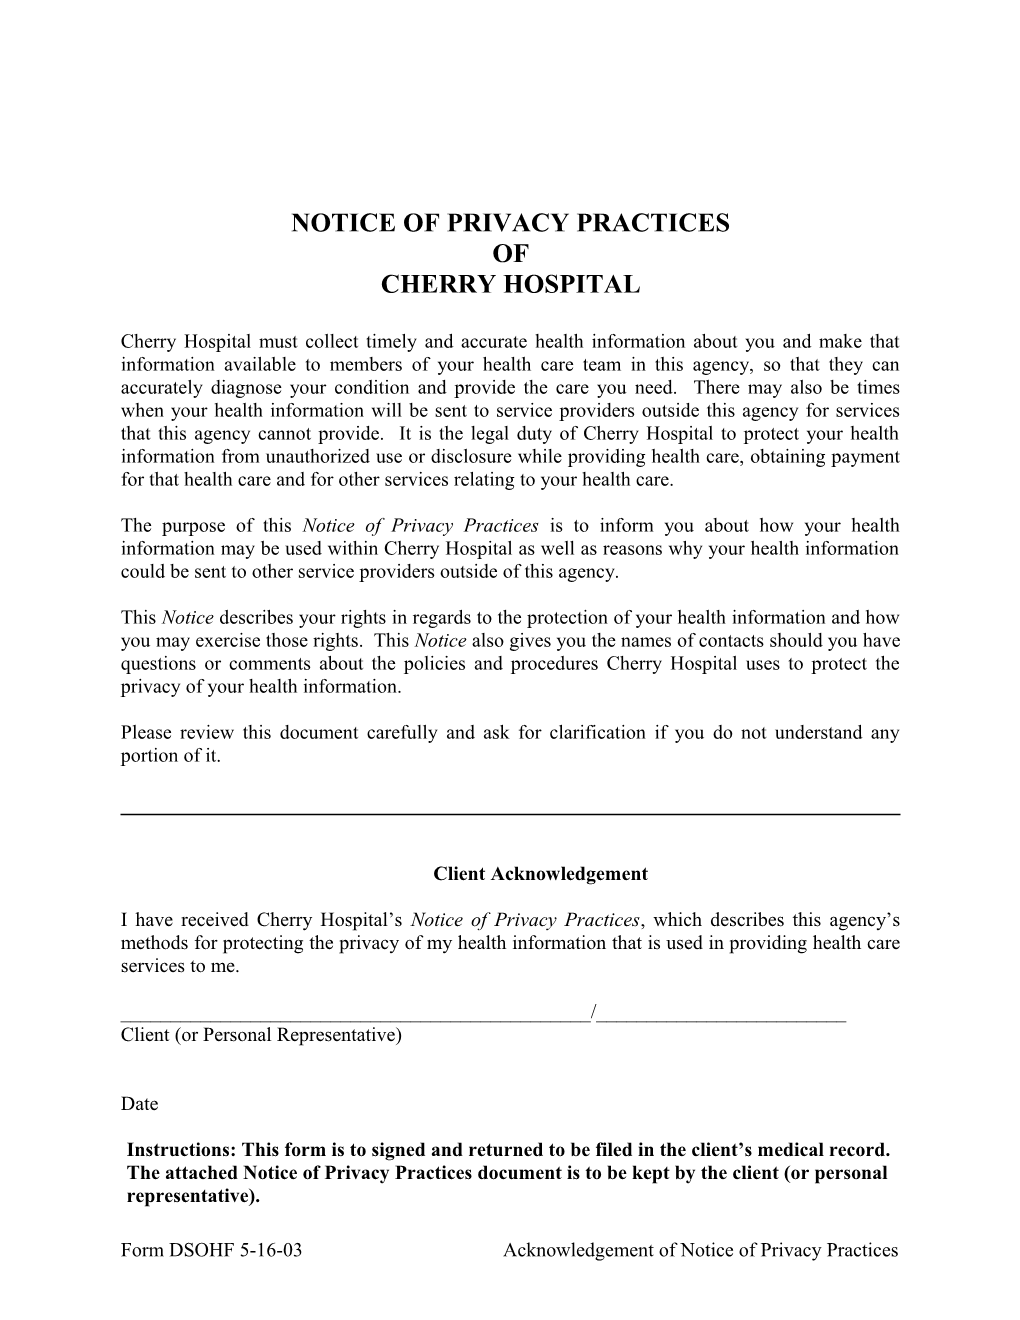 Notice of Privacy Practices s3